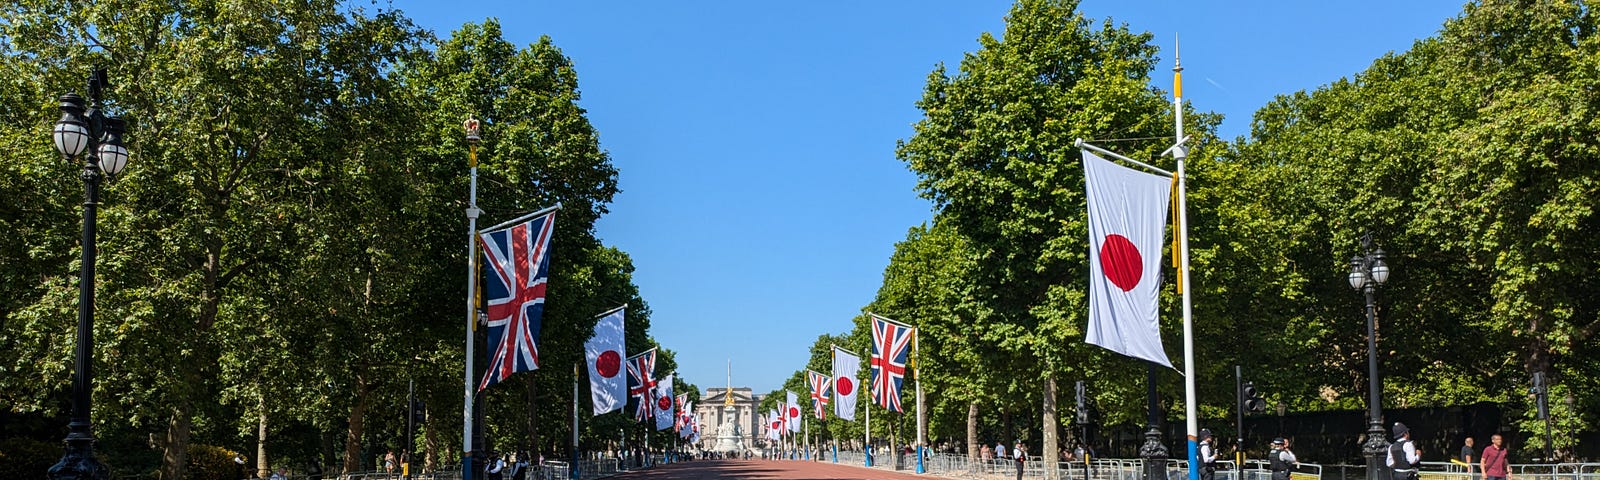 Pink street lined with trees and flags flying